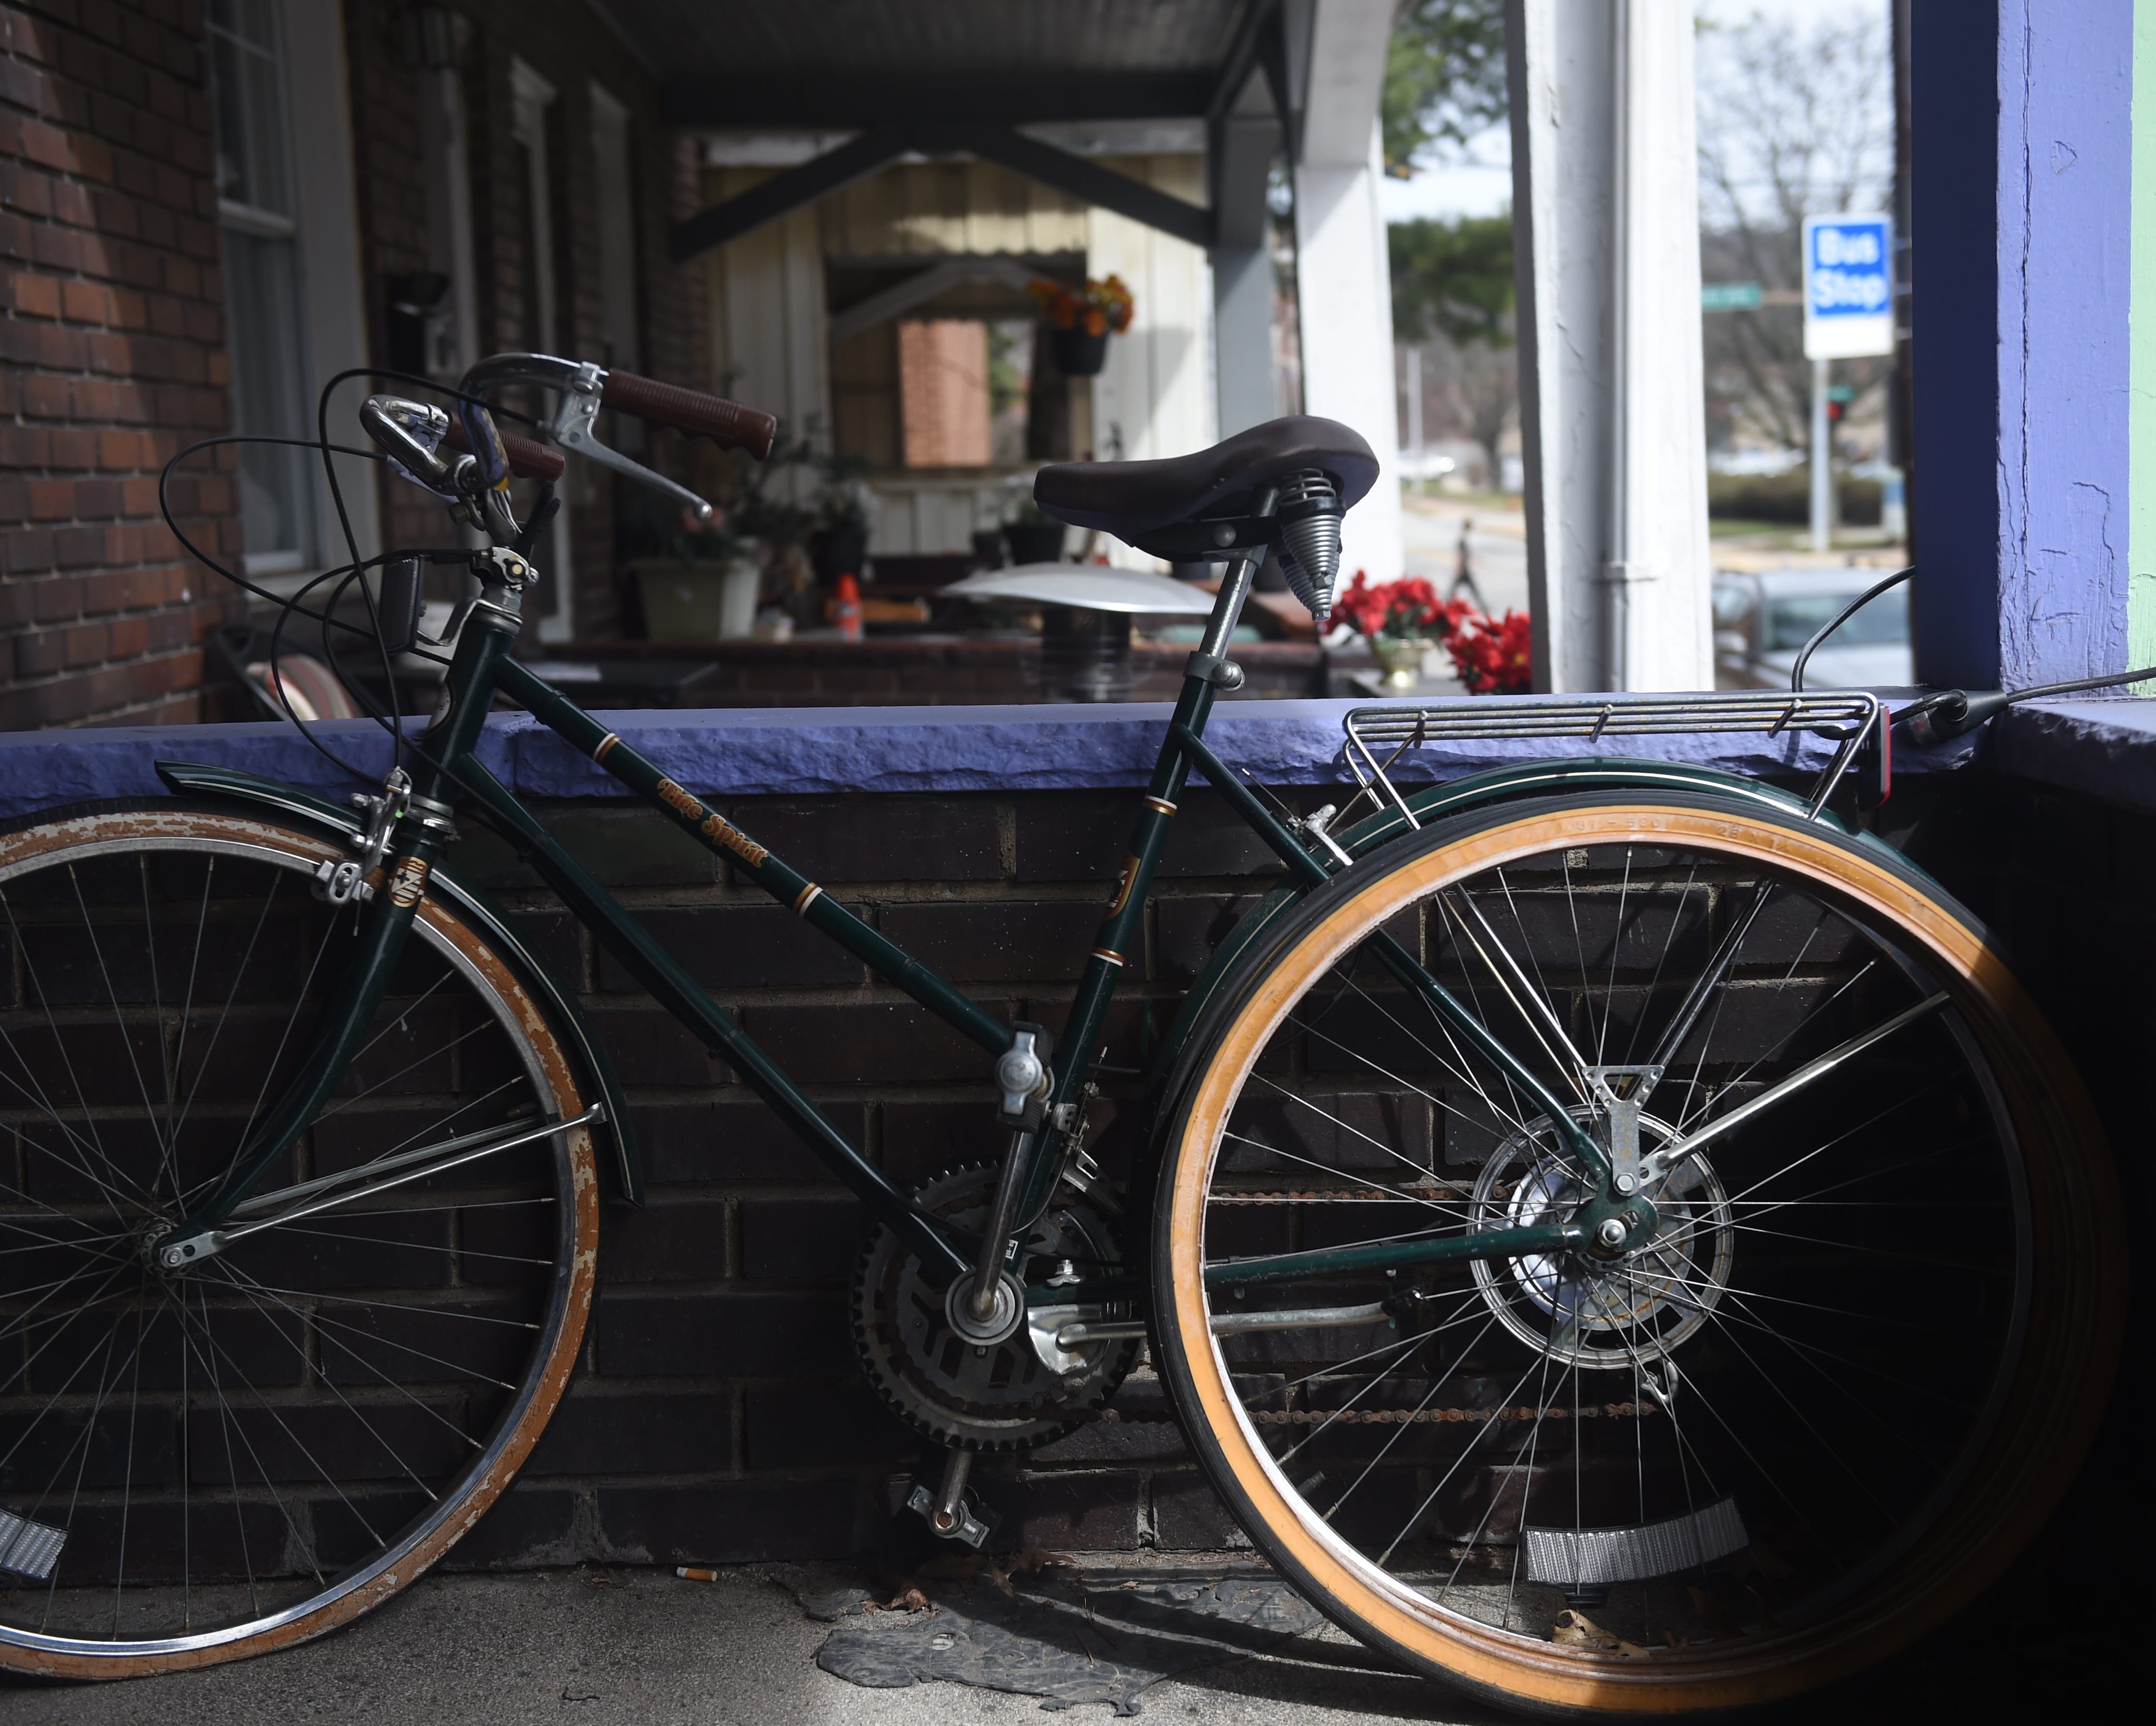 A bicycle sits outside Sharyn Sefton's apartment in Pittsburgh's Edgewood neighborhood. The 22-year-old Sefton purchased the bike to make traveling to work easier. The bike blew a tire and has remained shelved on the porch until Sefton can save enough to afford a new tire.